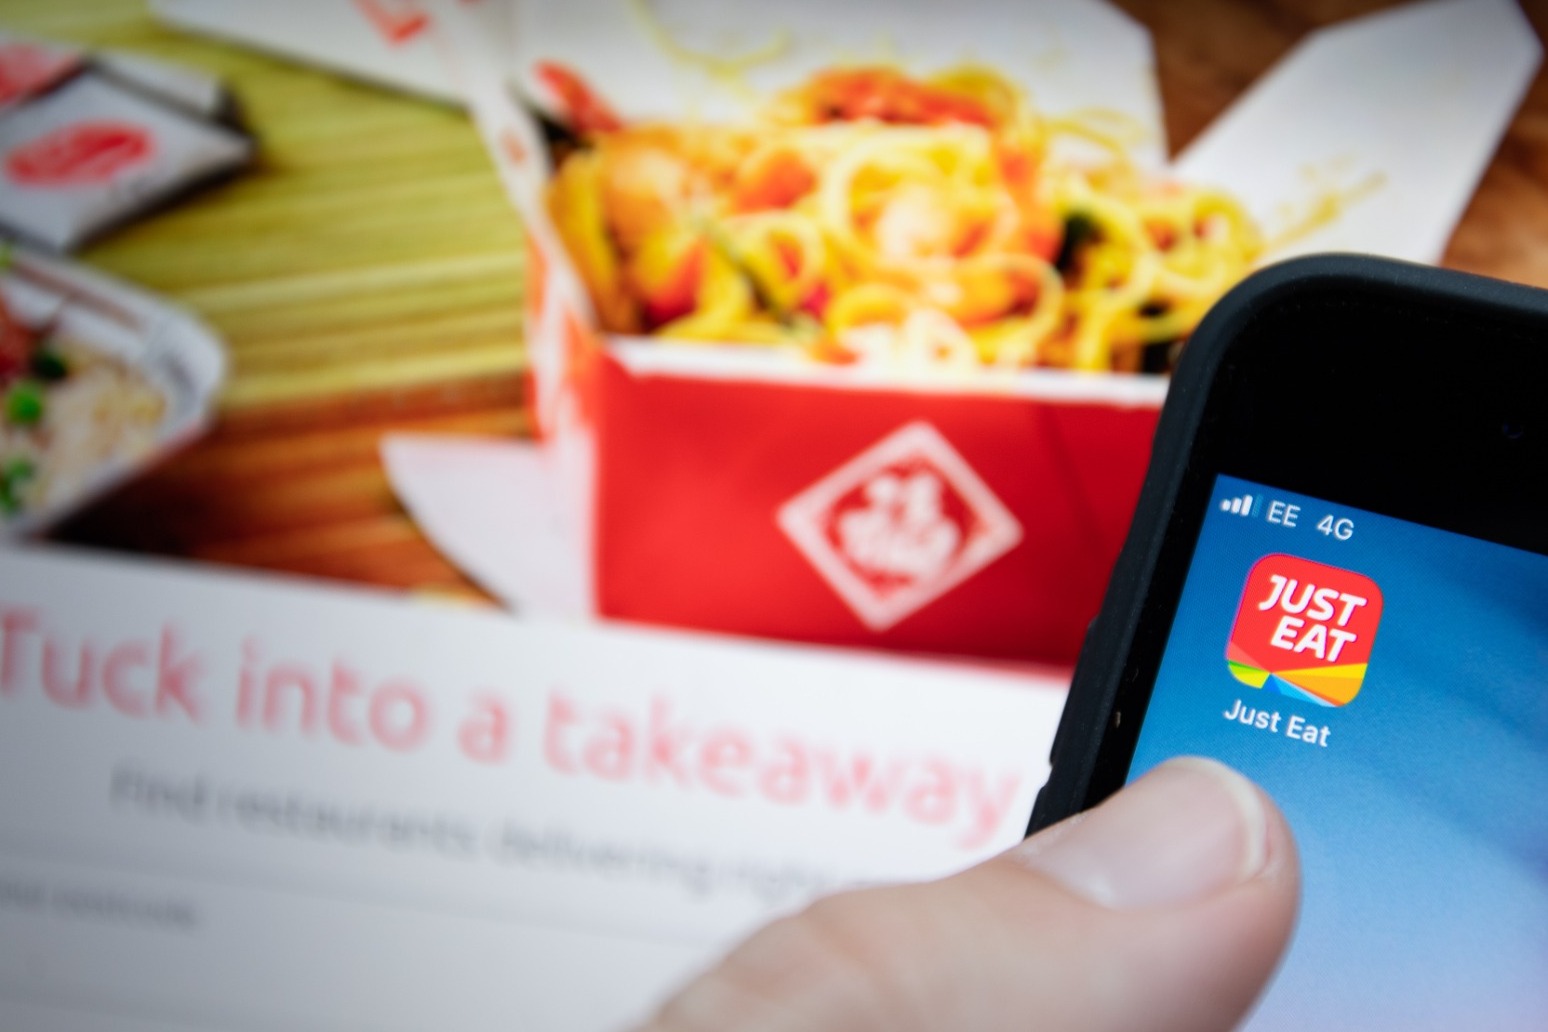 Just Eat to cut 1,700 delivery workers after takeaway slowdown 